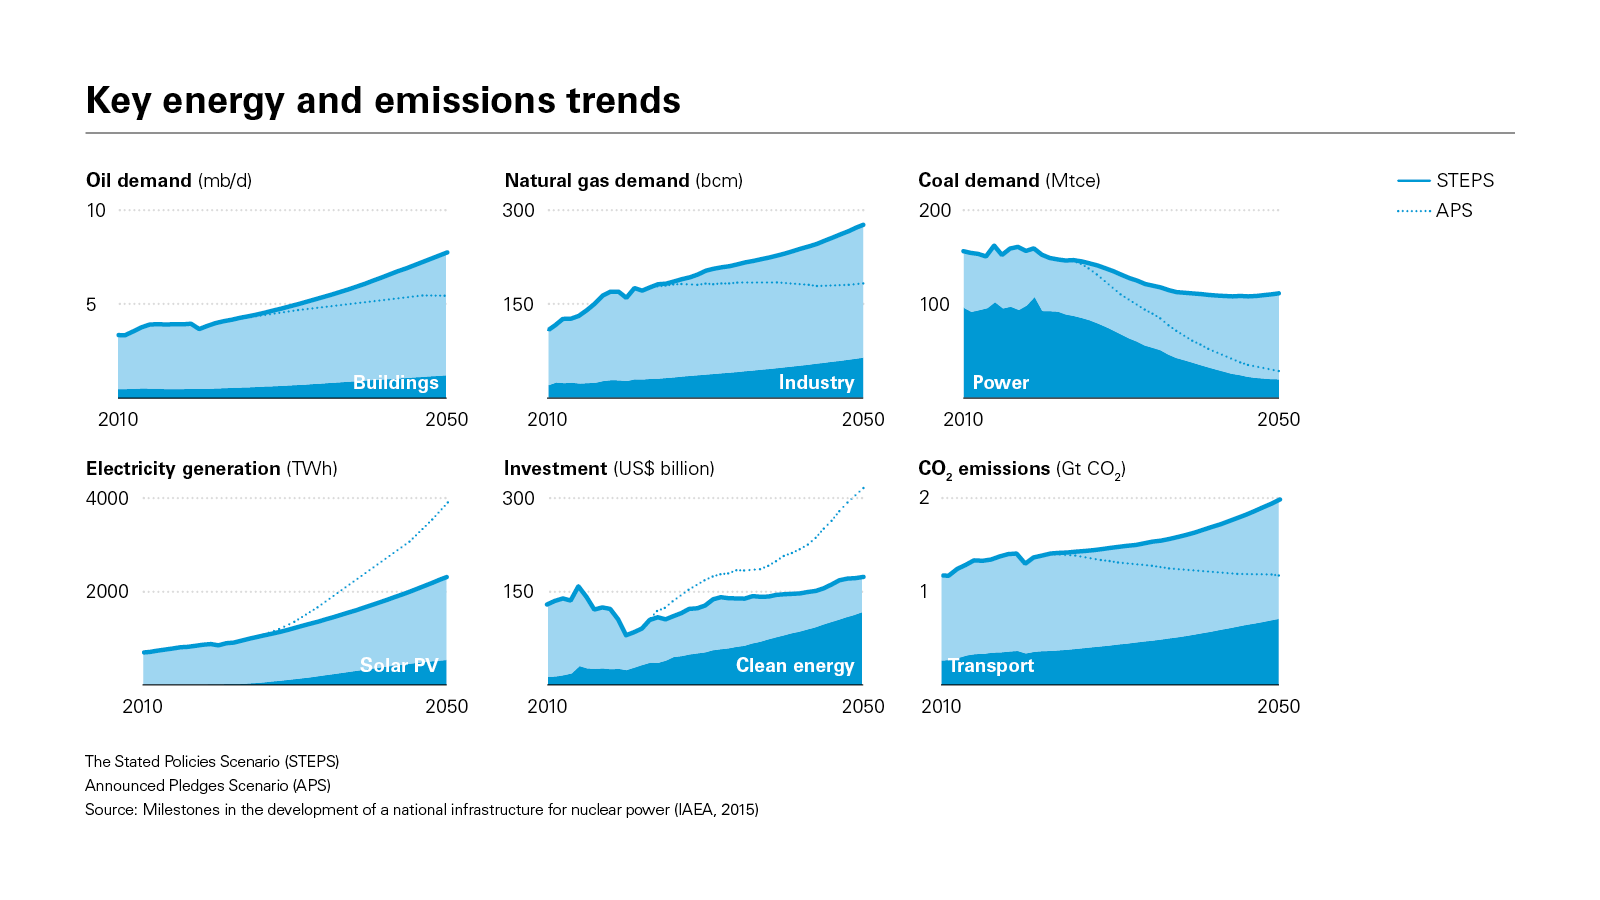 Key energy and emissions trends